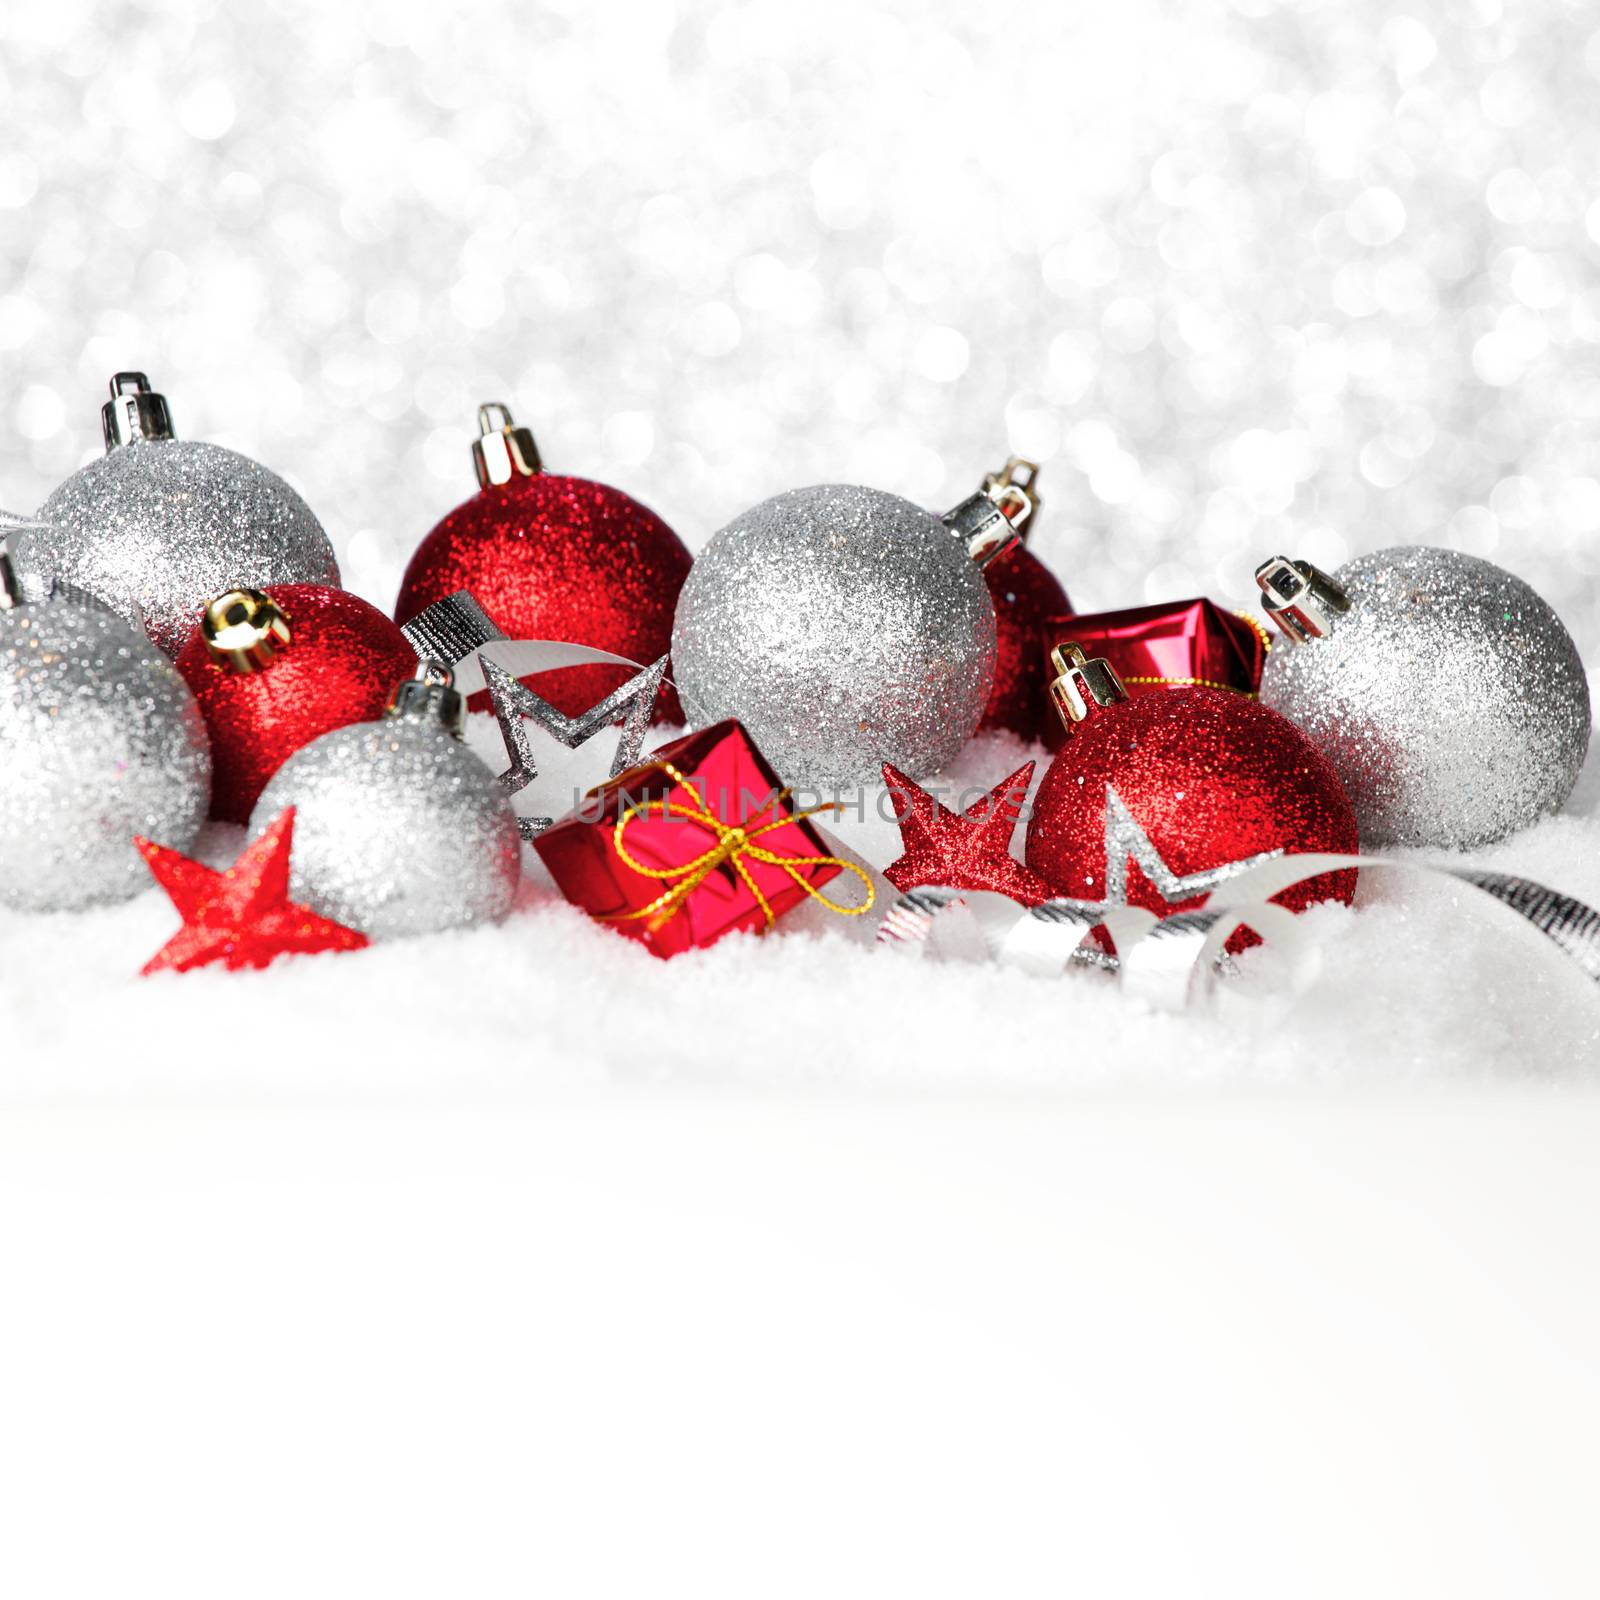 Christmas card with beautiful red and silver decorations in snow